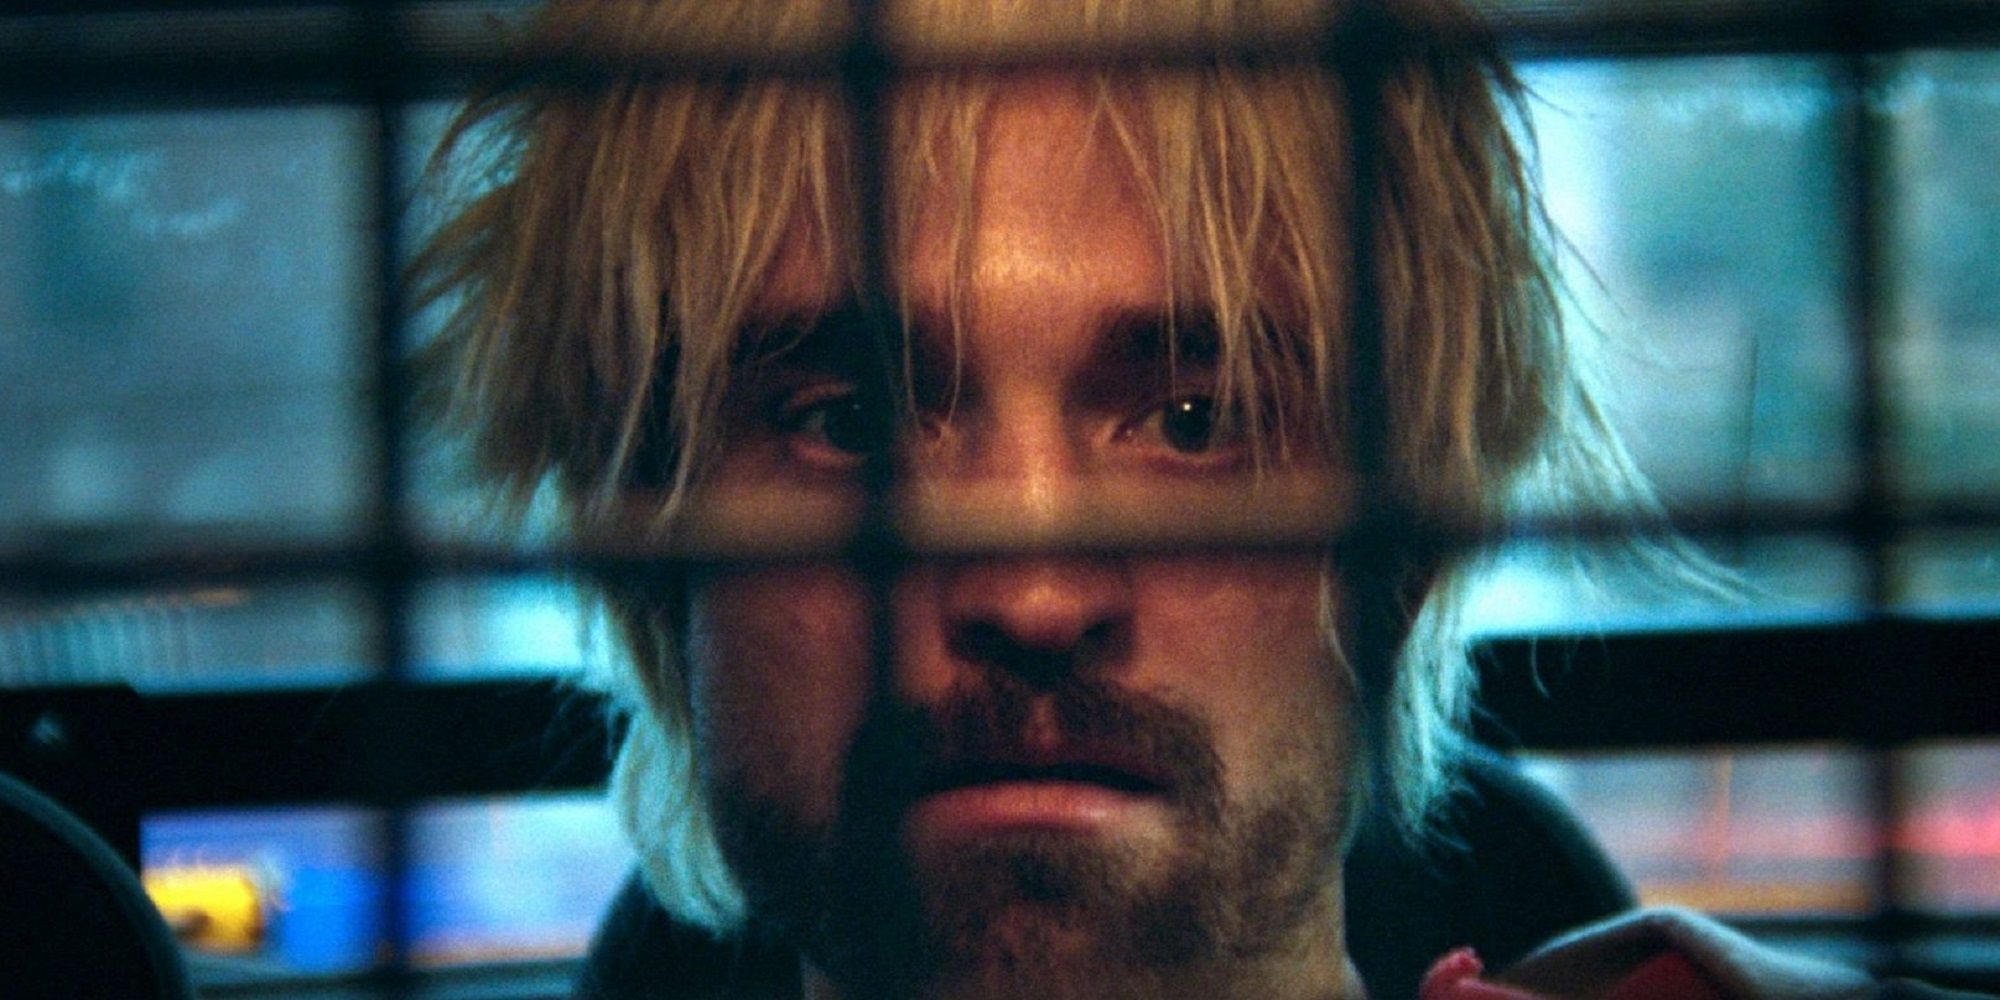 Connie in the back of the police car at the end of Good Time.